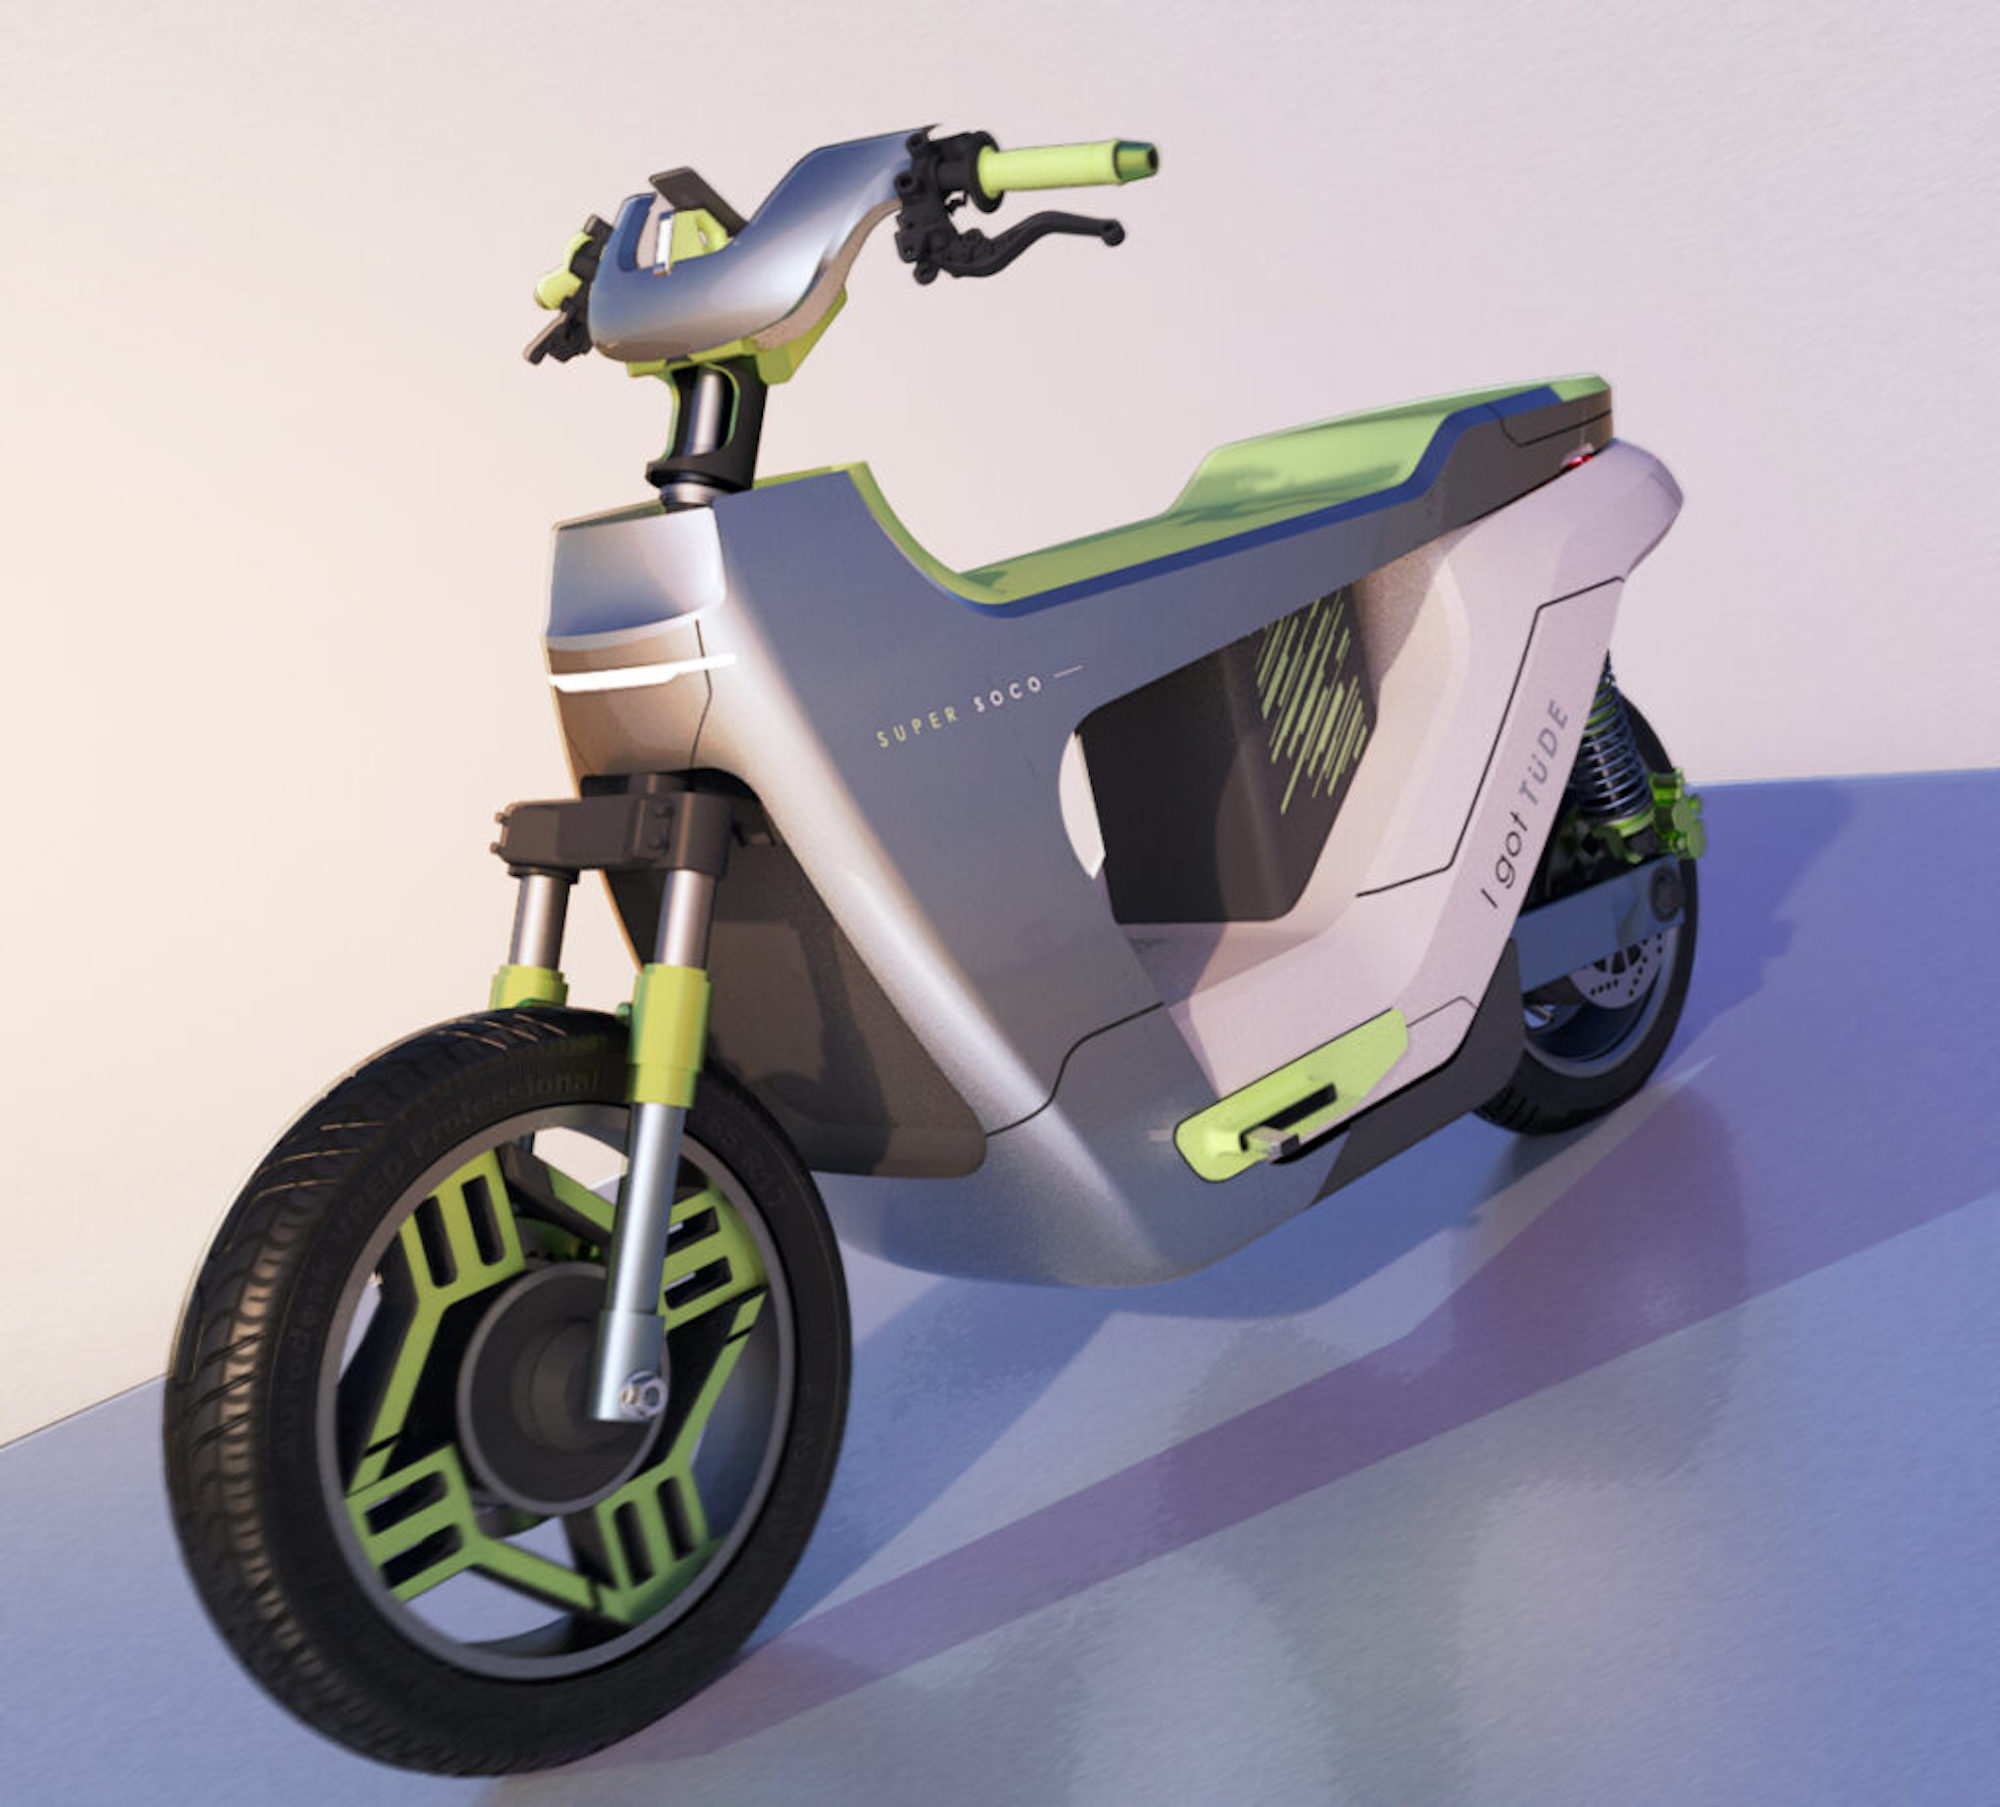 'Tude,' a moped concept built by Vivek-Marathe in a project with Super Soco. Media sourced from Living with Gravity.